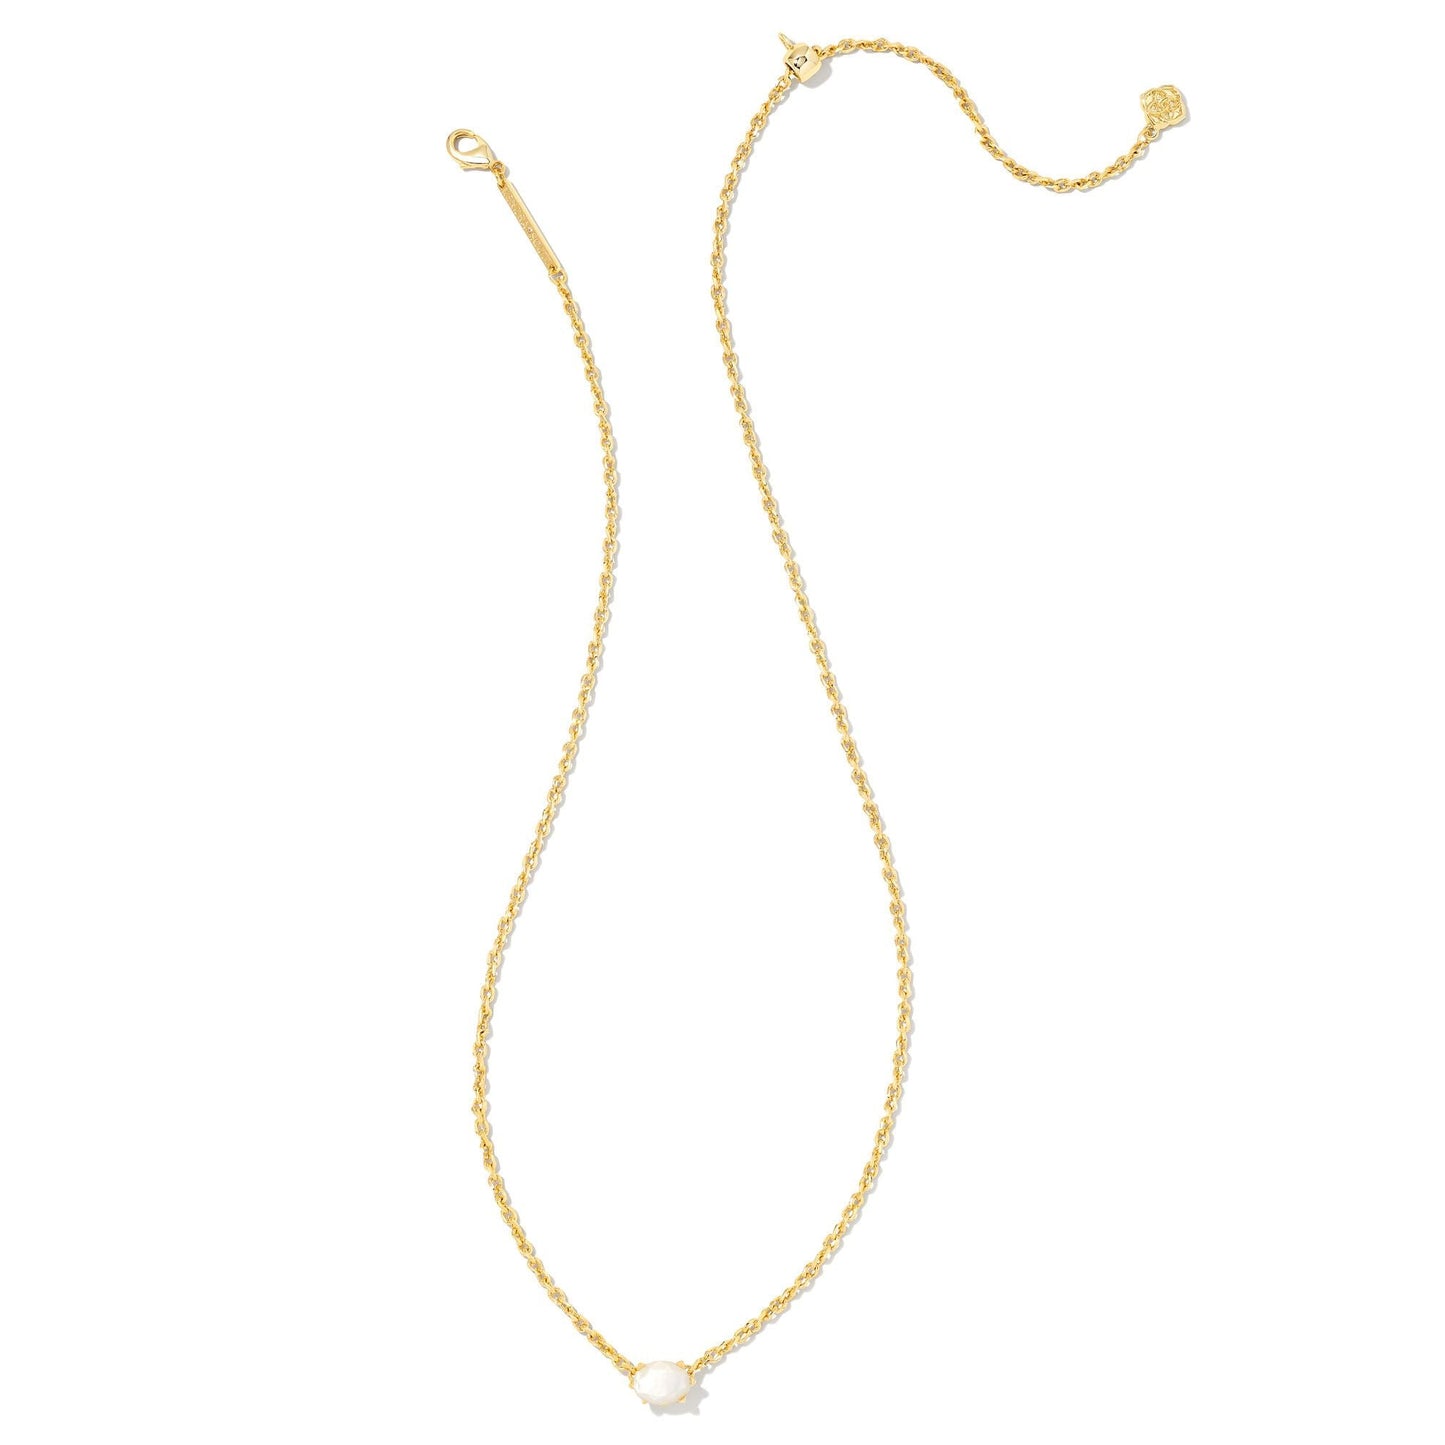 Cailin Crystal Necklace in Gold and Mother of Pearl